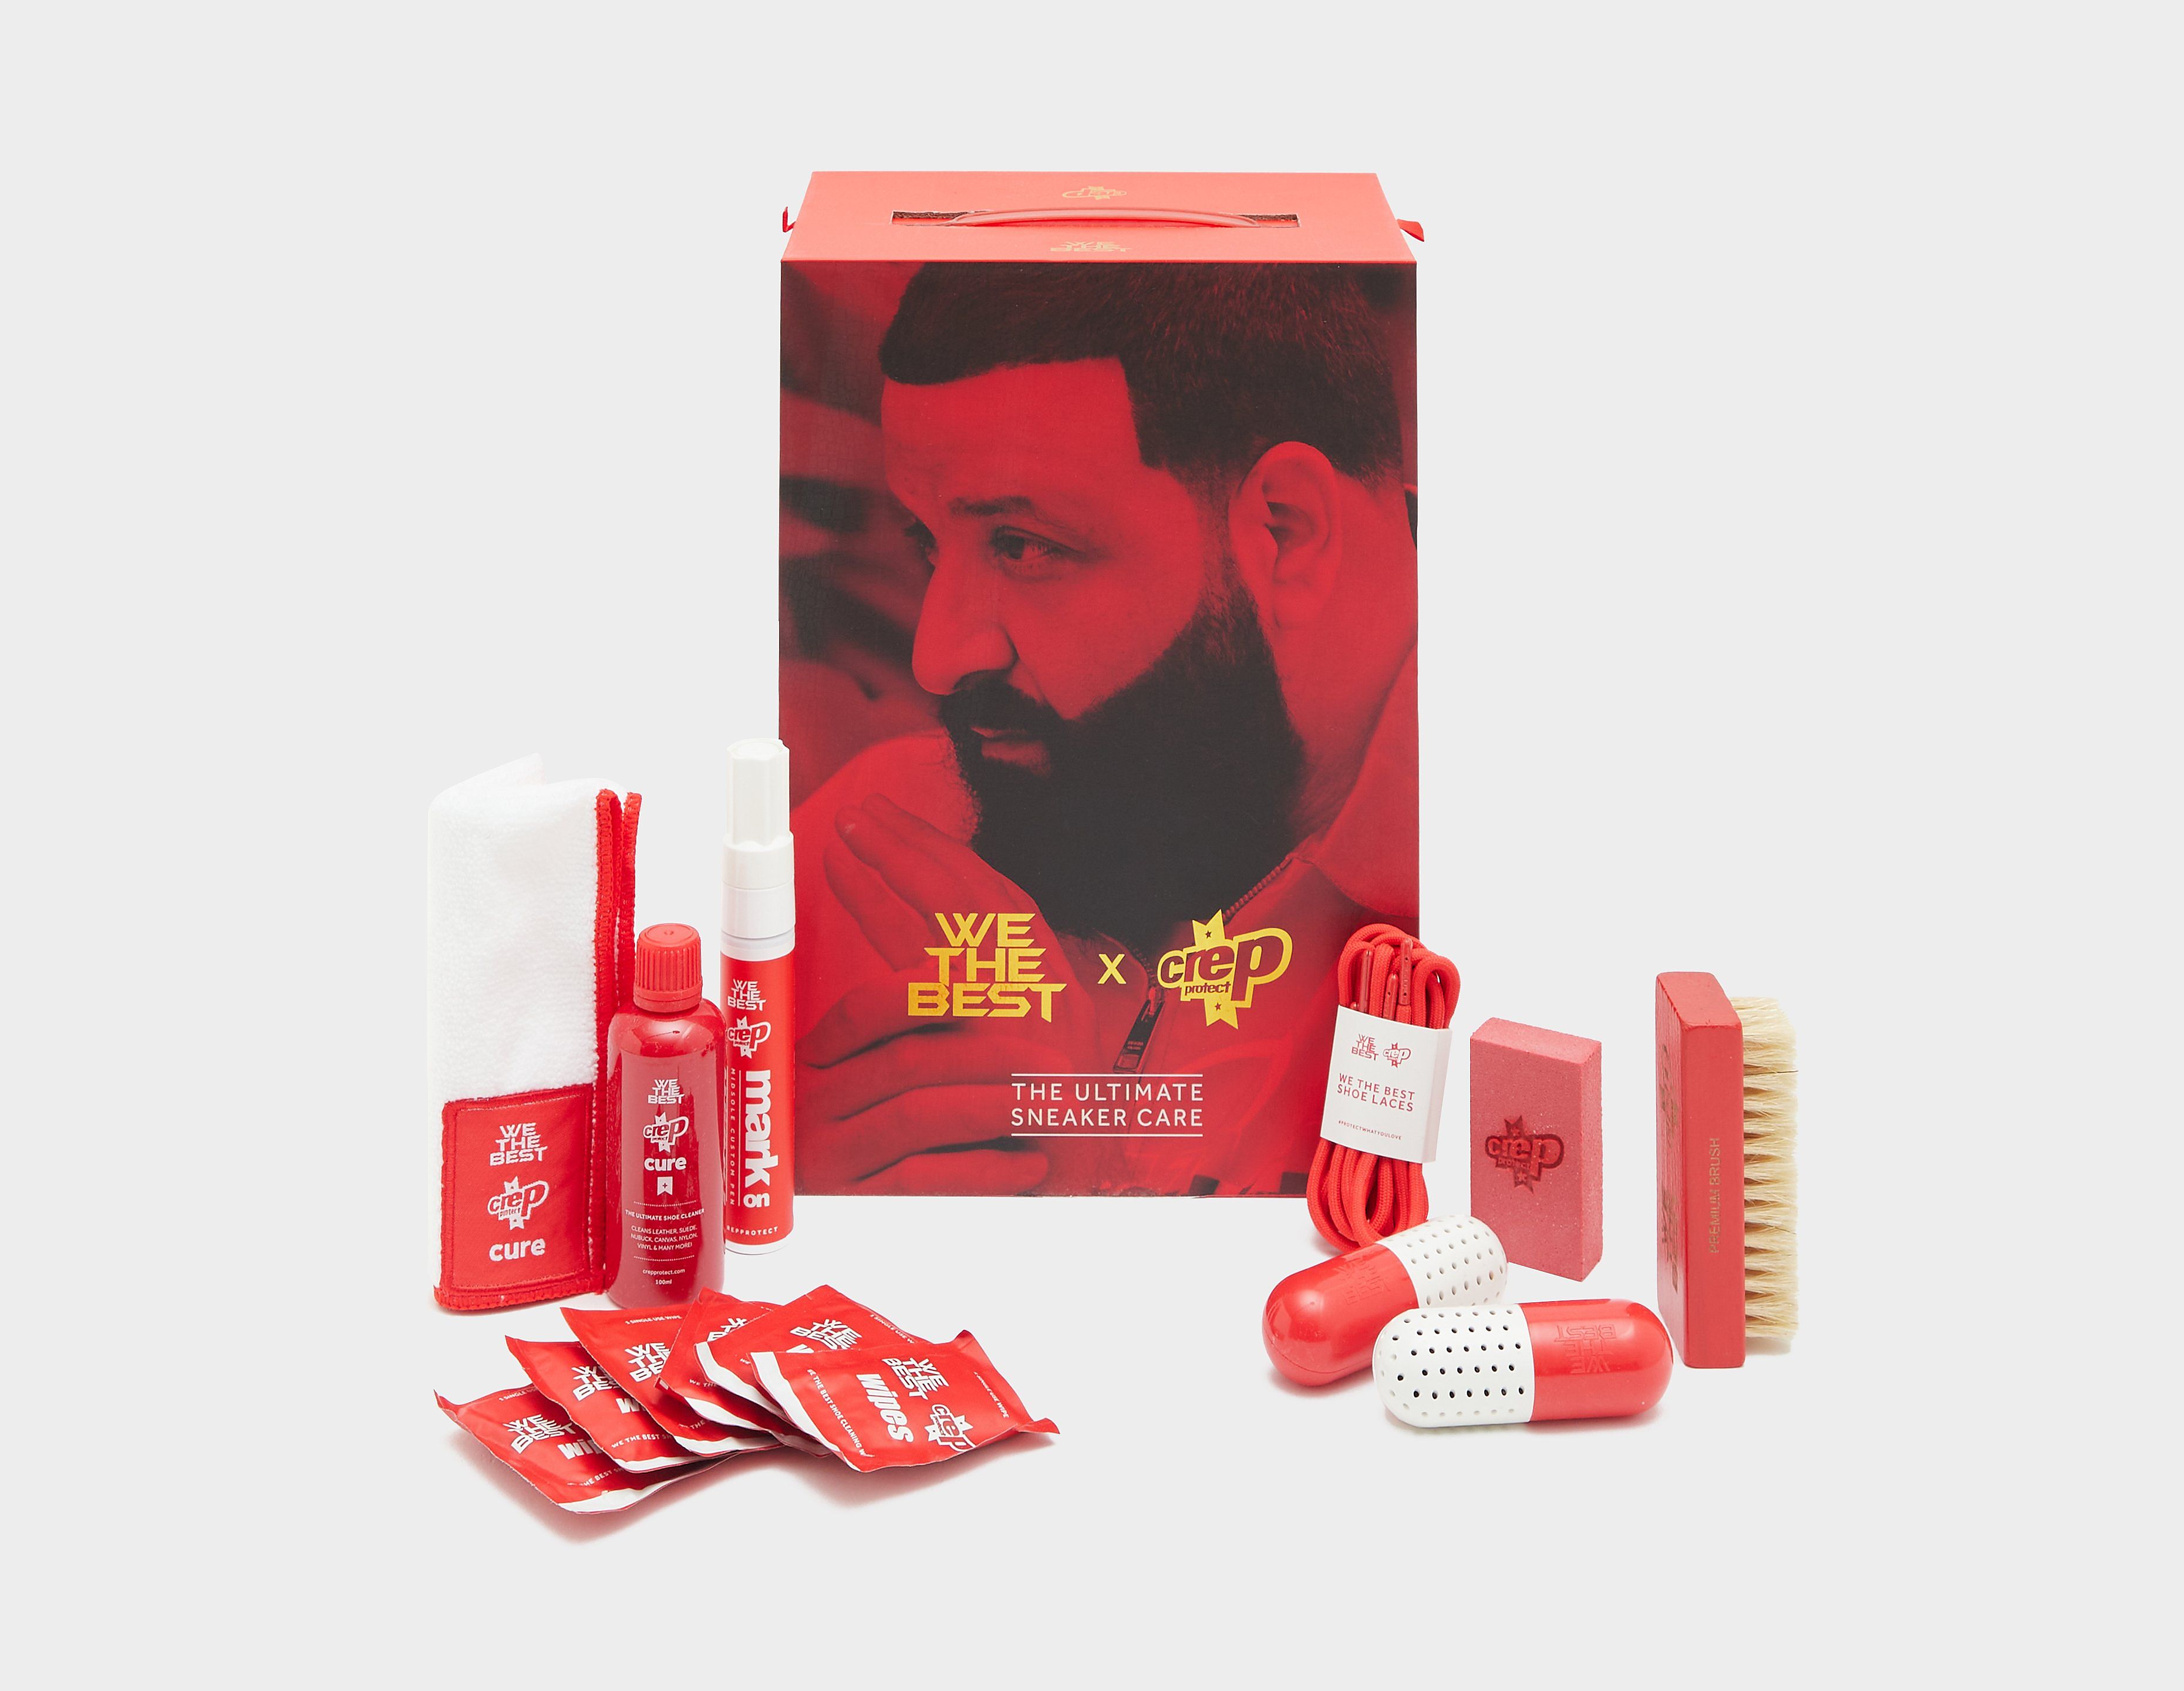 crep protect x dj khaled sneaker care box, red